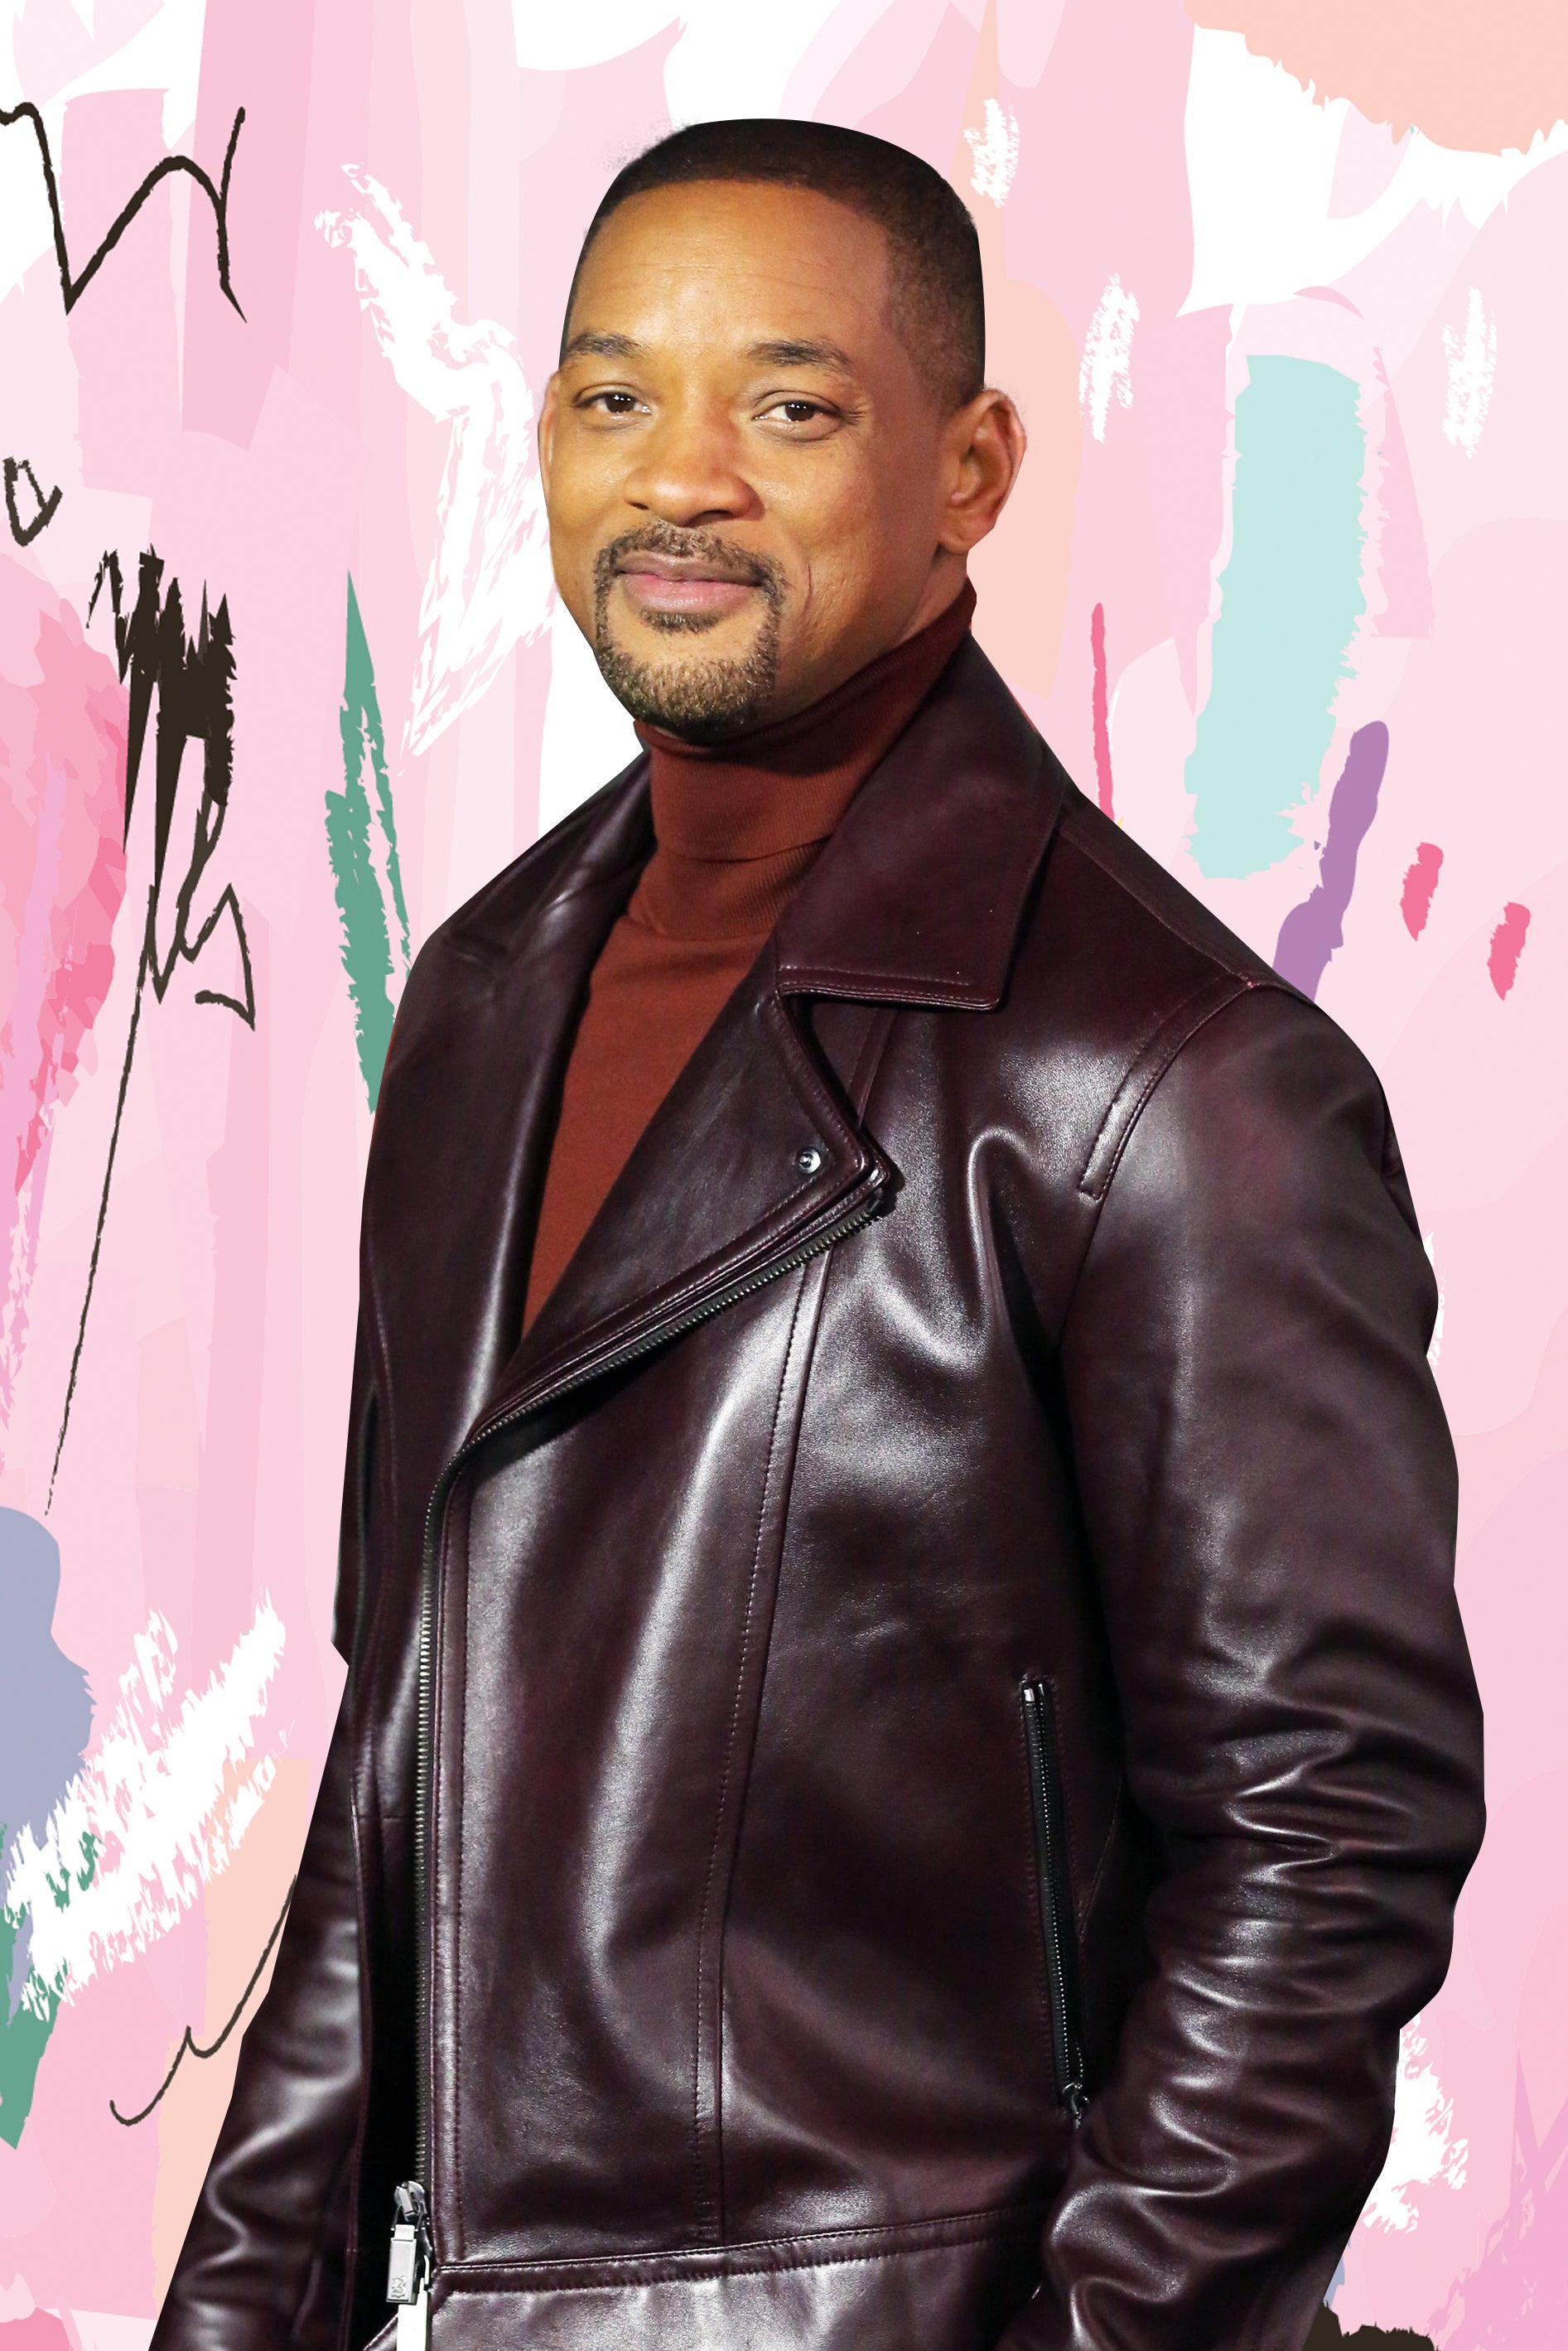 Will Smith on a potential Fresh Prince revival: 'I'd have to be Uncle Phil'
